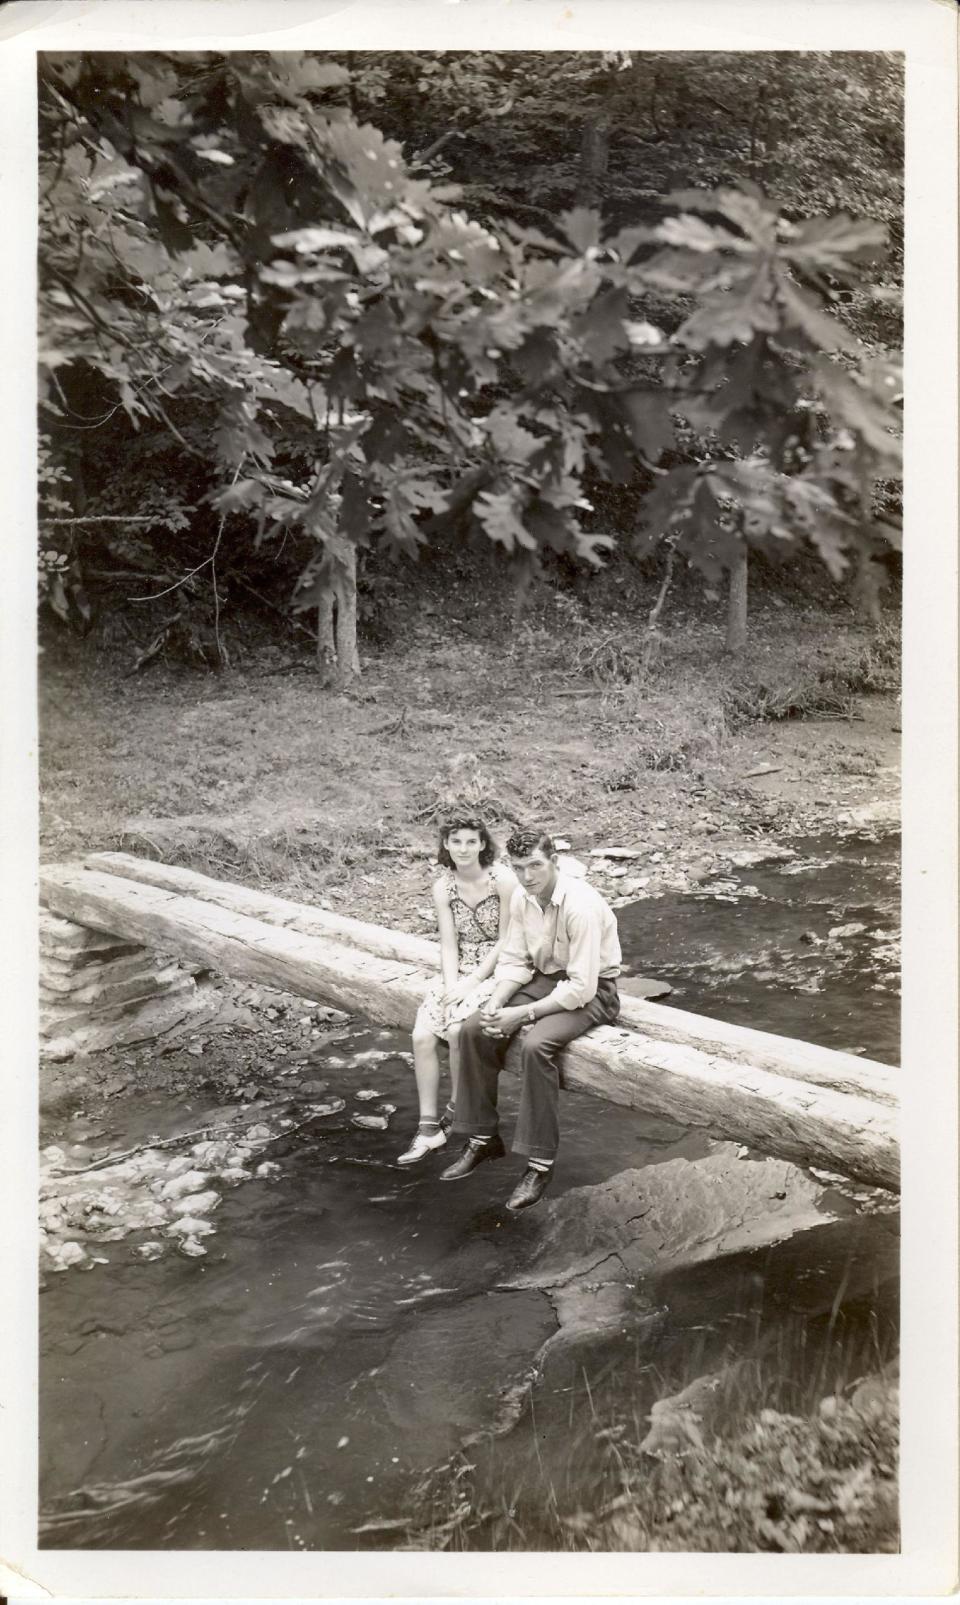 In this September 1940 photo provided by Dick Felumlee, Kenneth and Helen Felumlee of Nashport in central Ohio are shown sitting on a log north of Zanesville about four years before their marriage. The Felumlees, who celebrated their 70th wedding anniversary in February, died 15 hours apart from each other last week. (AP Photo/Felumlee family)